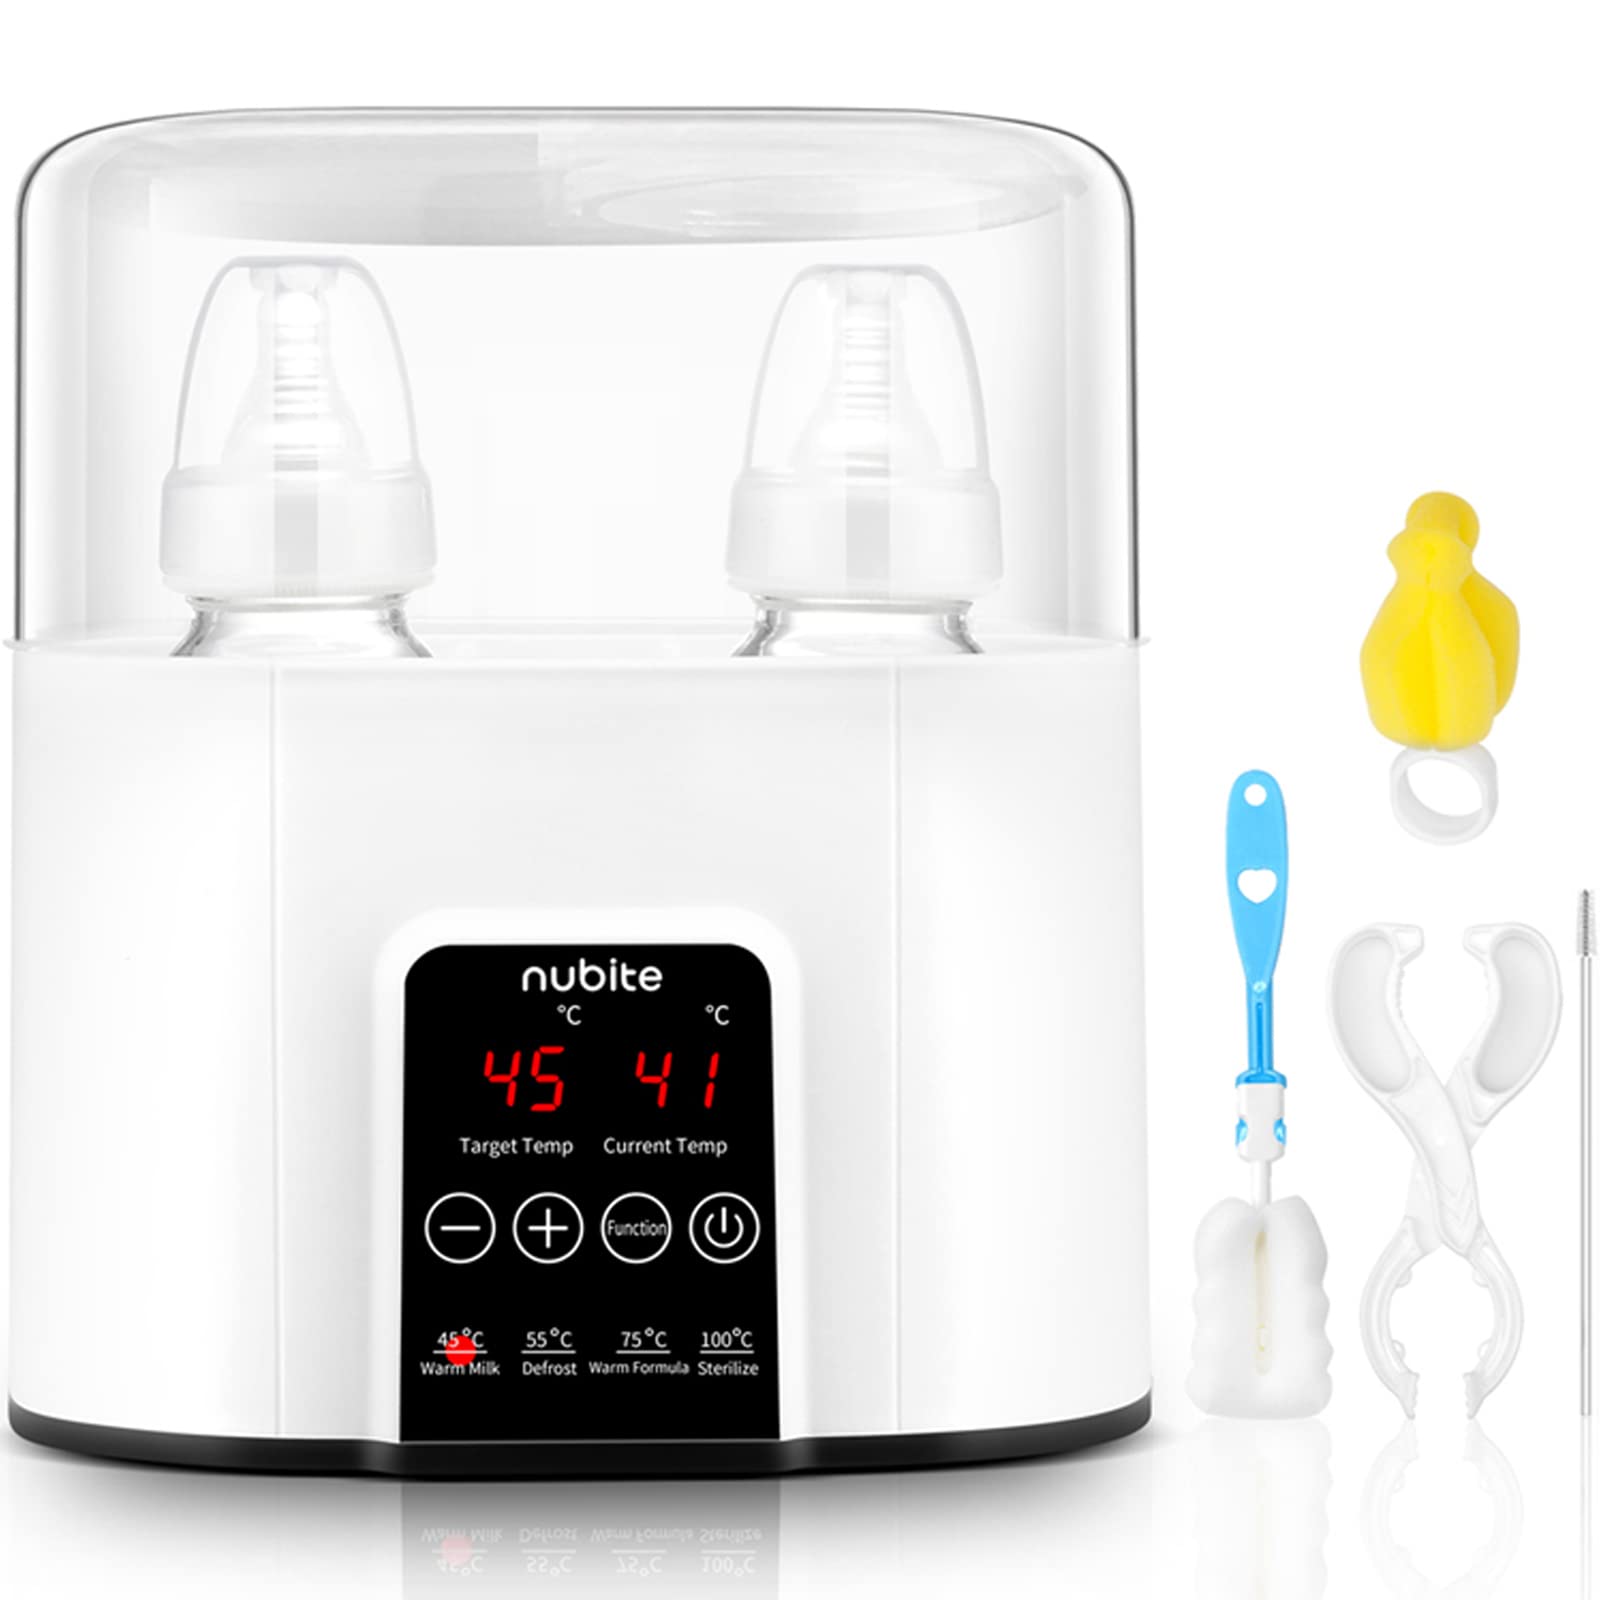 Milk Warmer for Baby, Bottle Warmer for Breastmilk Thawing, Bottle Steril-izer, Food Steamer, Water Warmer for Formula, LCD Display Accurate Temperature Adjustment, 24H Constant Mode